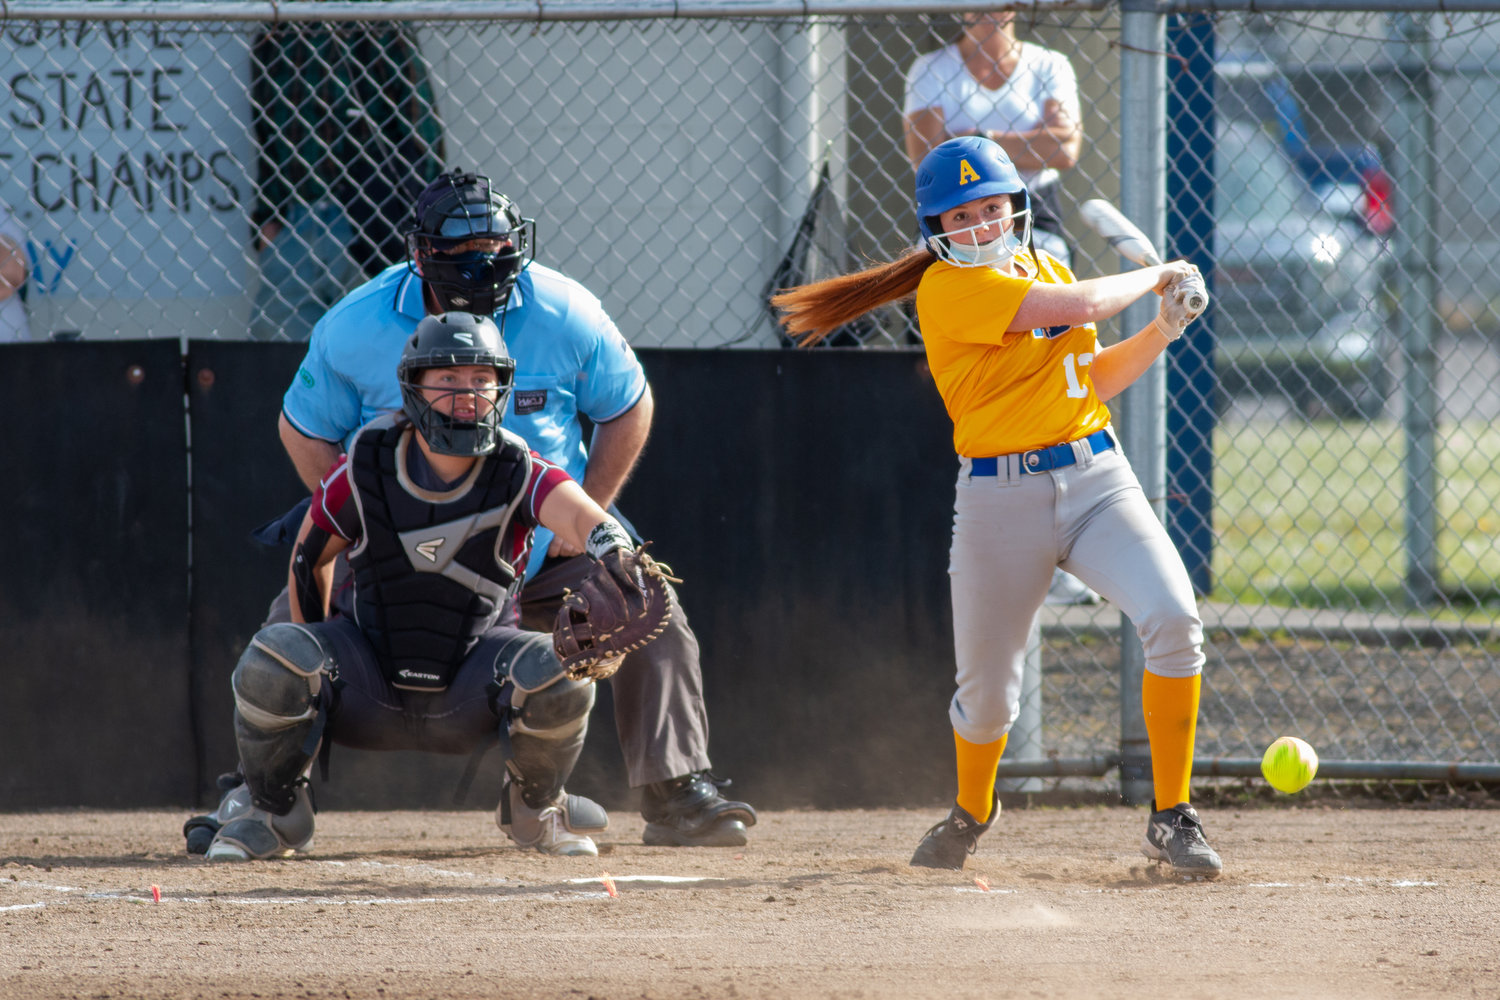 Adna's Natalie Loose smacks a base hit against Ocosta during the semifinal round of the district tournament Thursday at home.